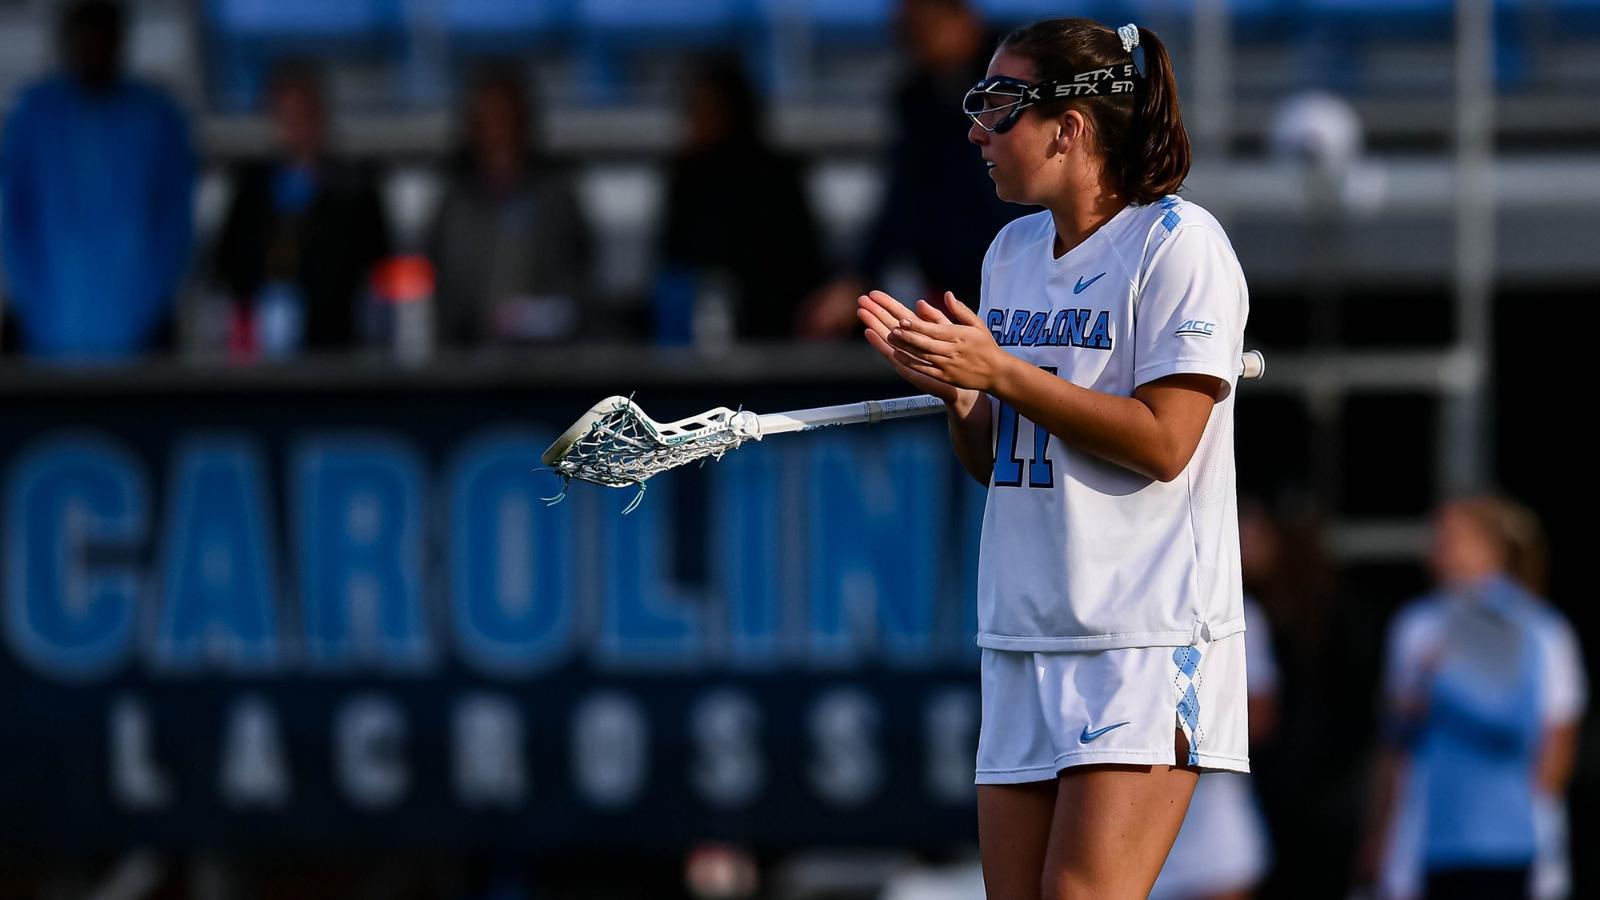 UNC Women’s Lacrosse To Play Florida In NCAA Tournament First Round Friday